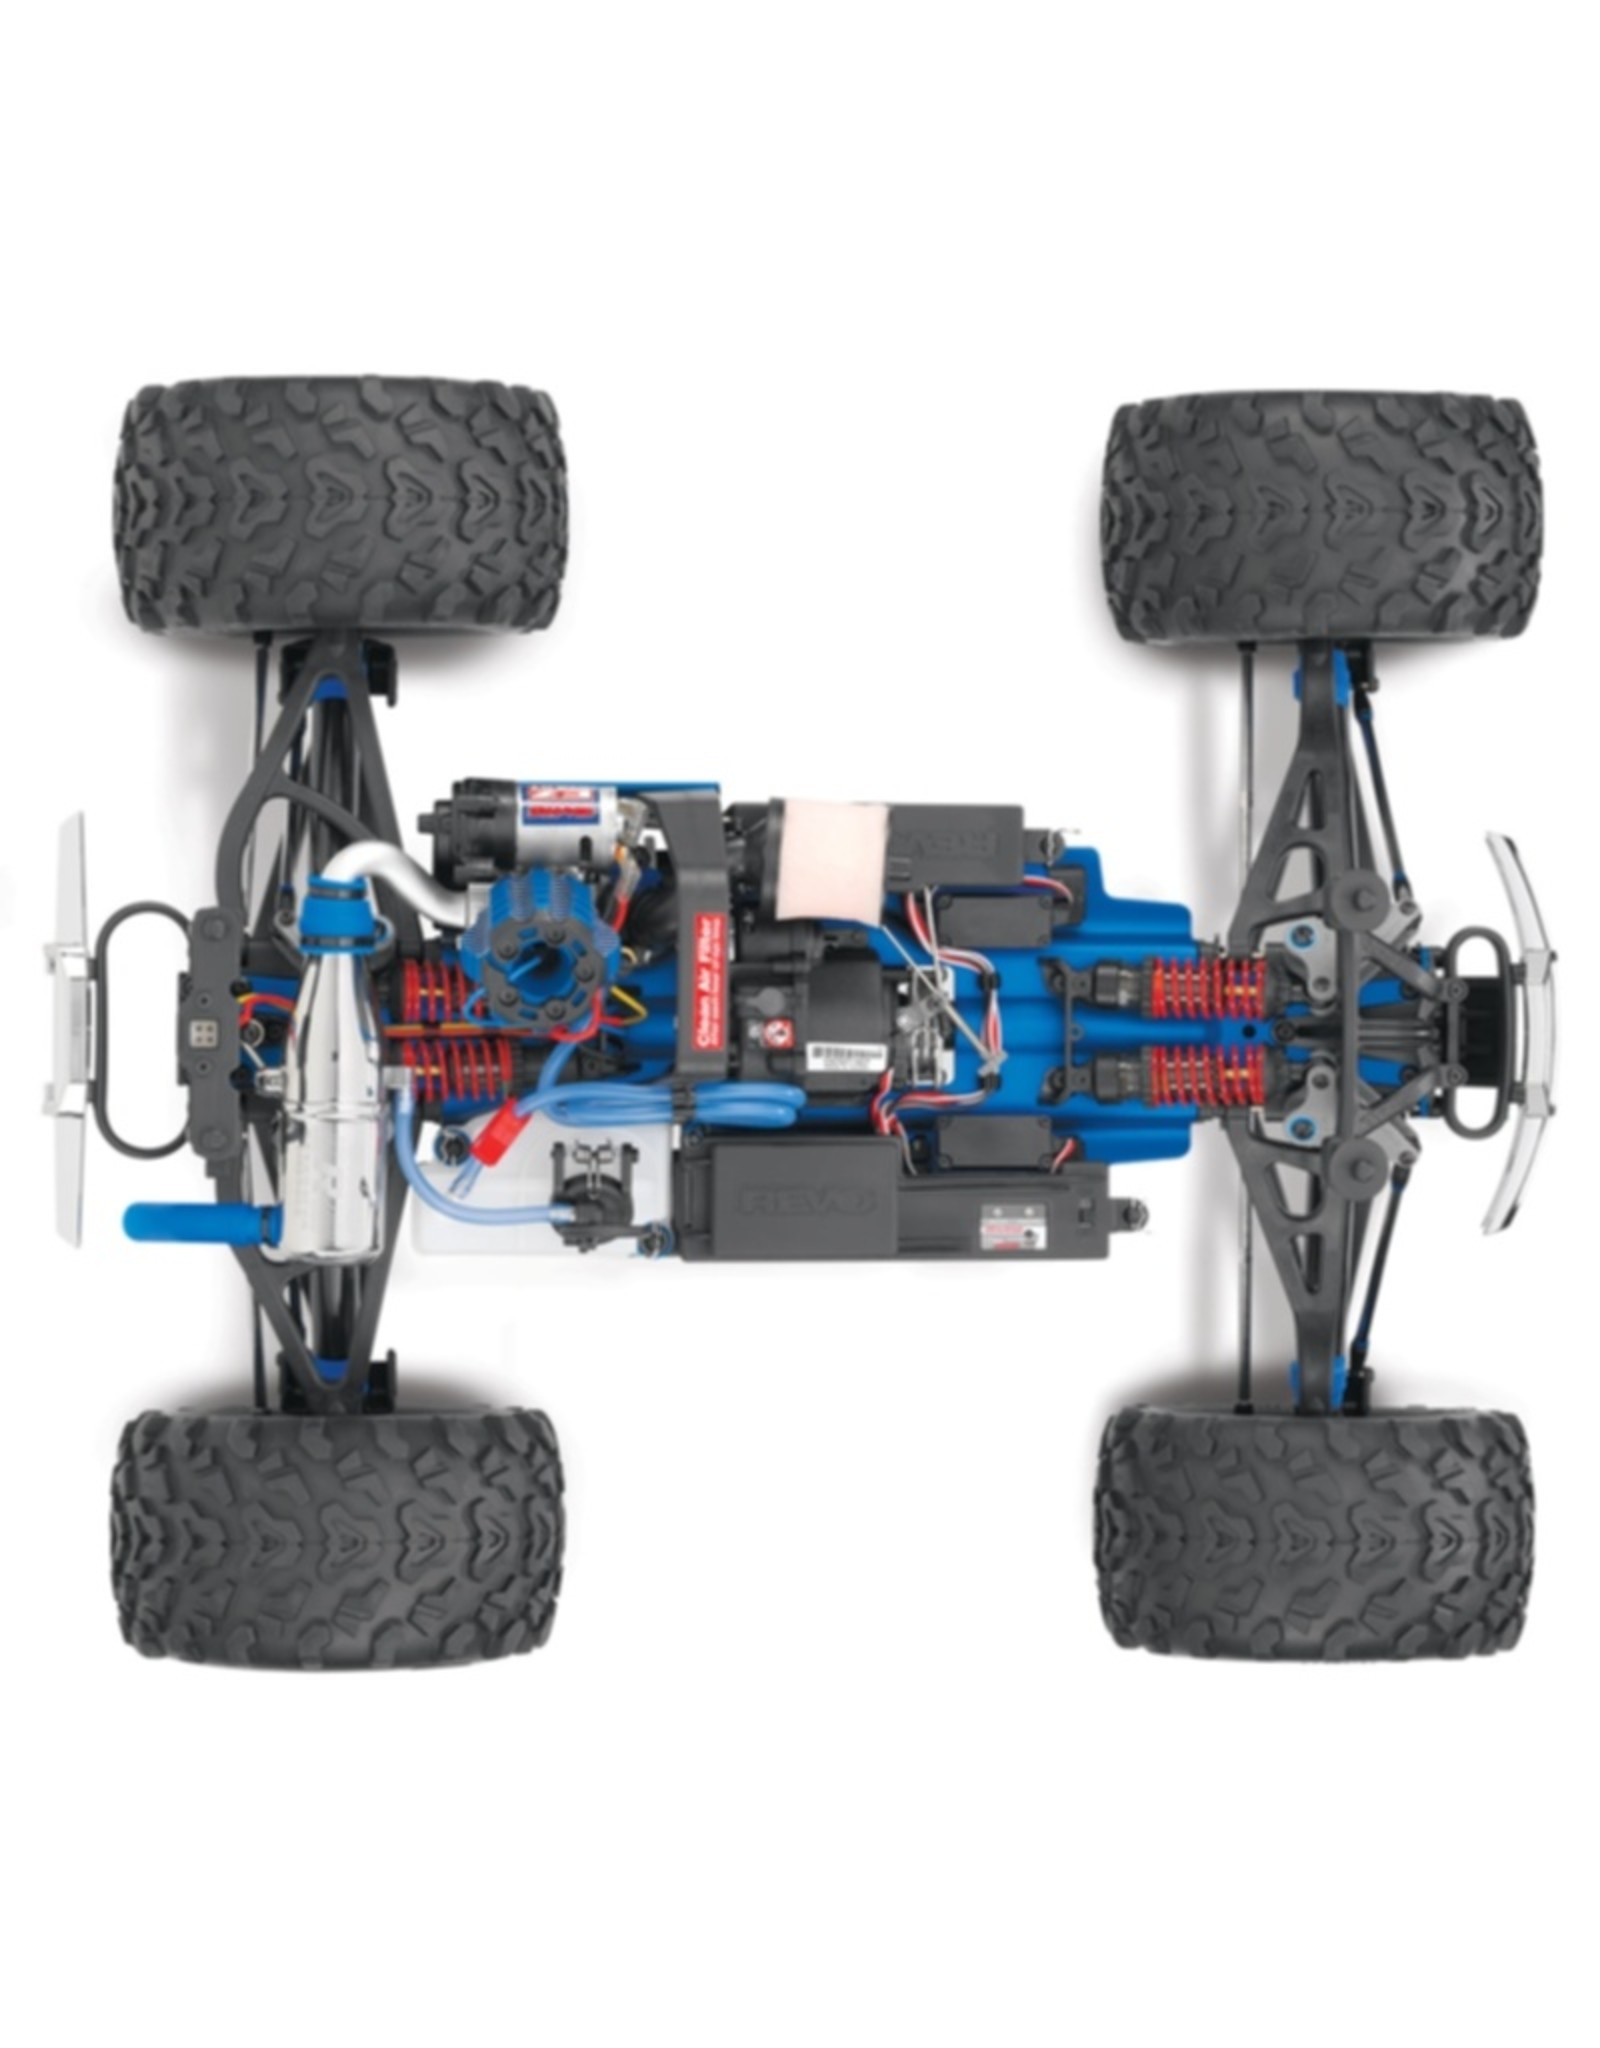 Traxxas TRA53097- 3 Silver - Revo® 3.3: 1/10 Scale 4WD Nitro-Powered Monster Truck. Ready-to-Race®